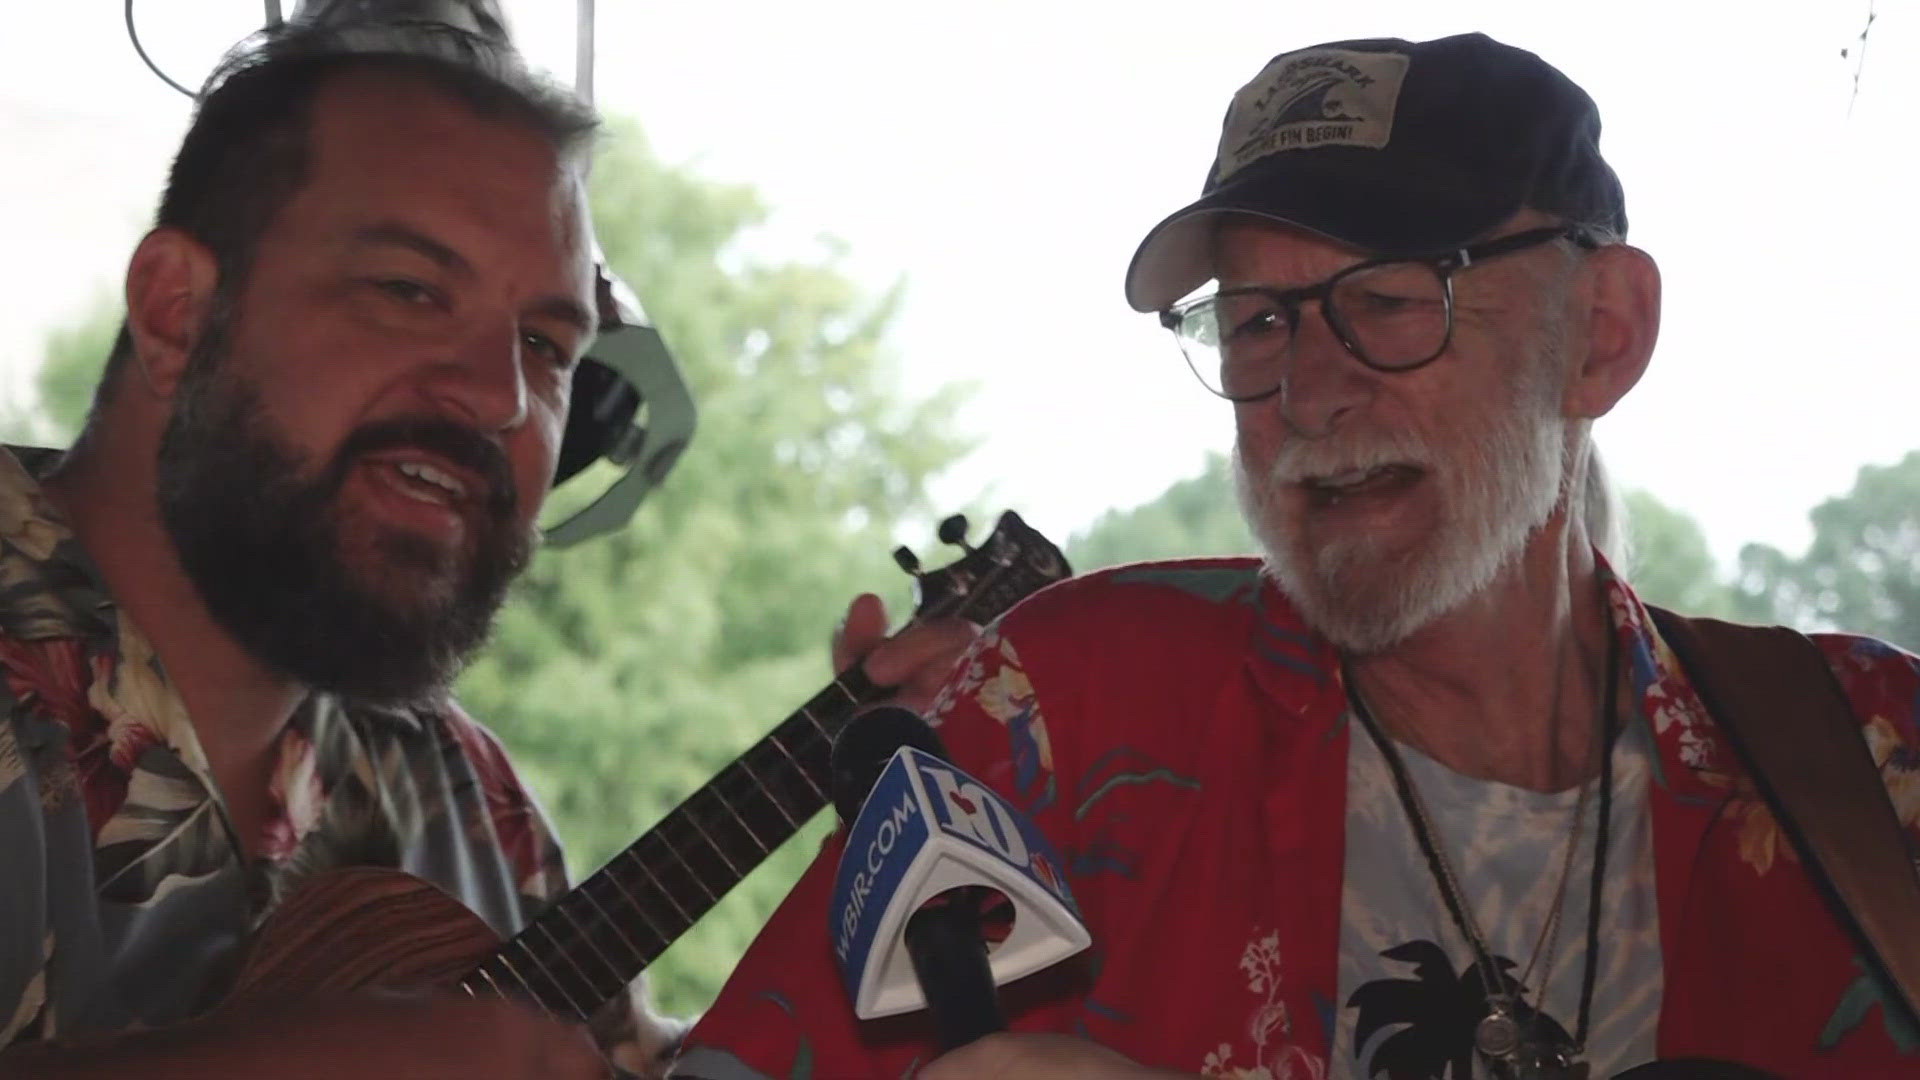 Bary and Derrick Jolly, a father-son duo, will perform on the Festival Lawn stage from 6 to 7:45 p.m. during the Festival on the Fourth in downtown Knoxville.